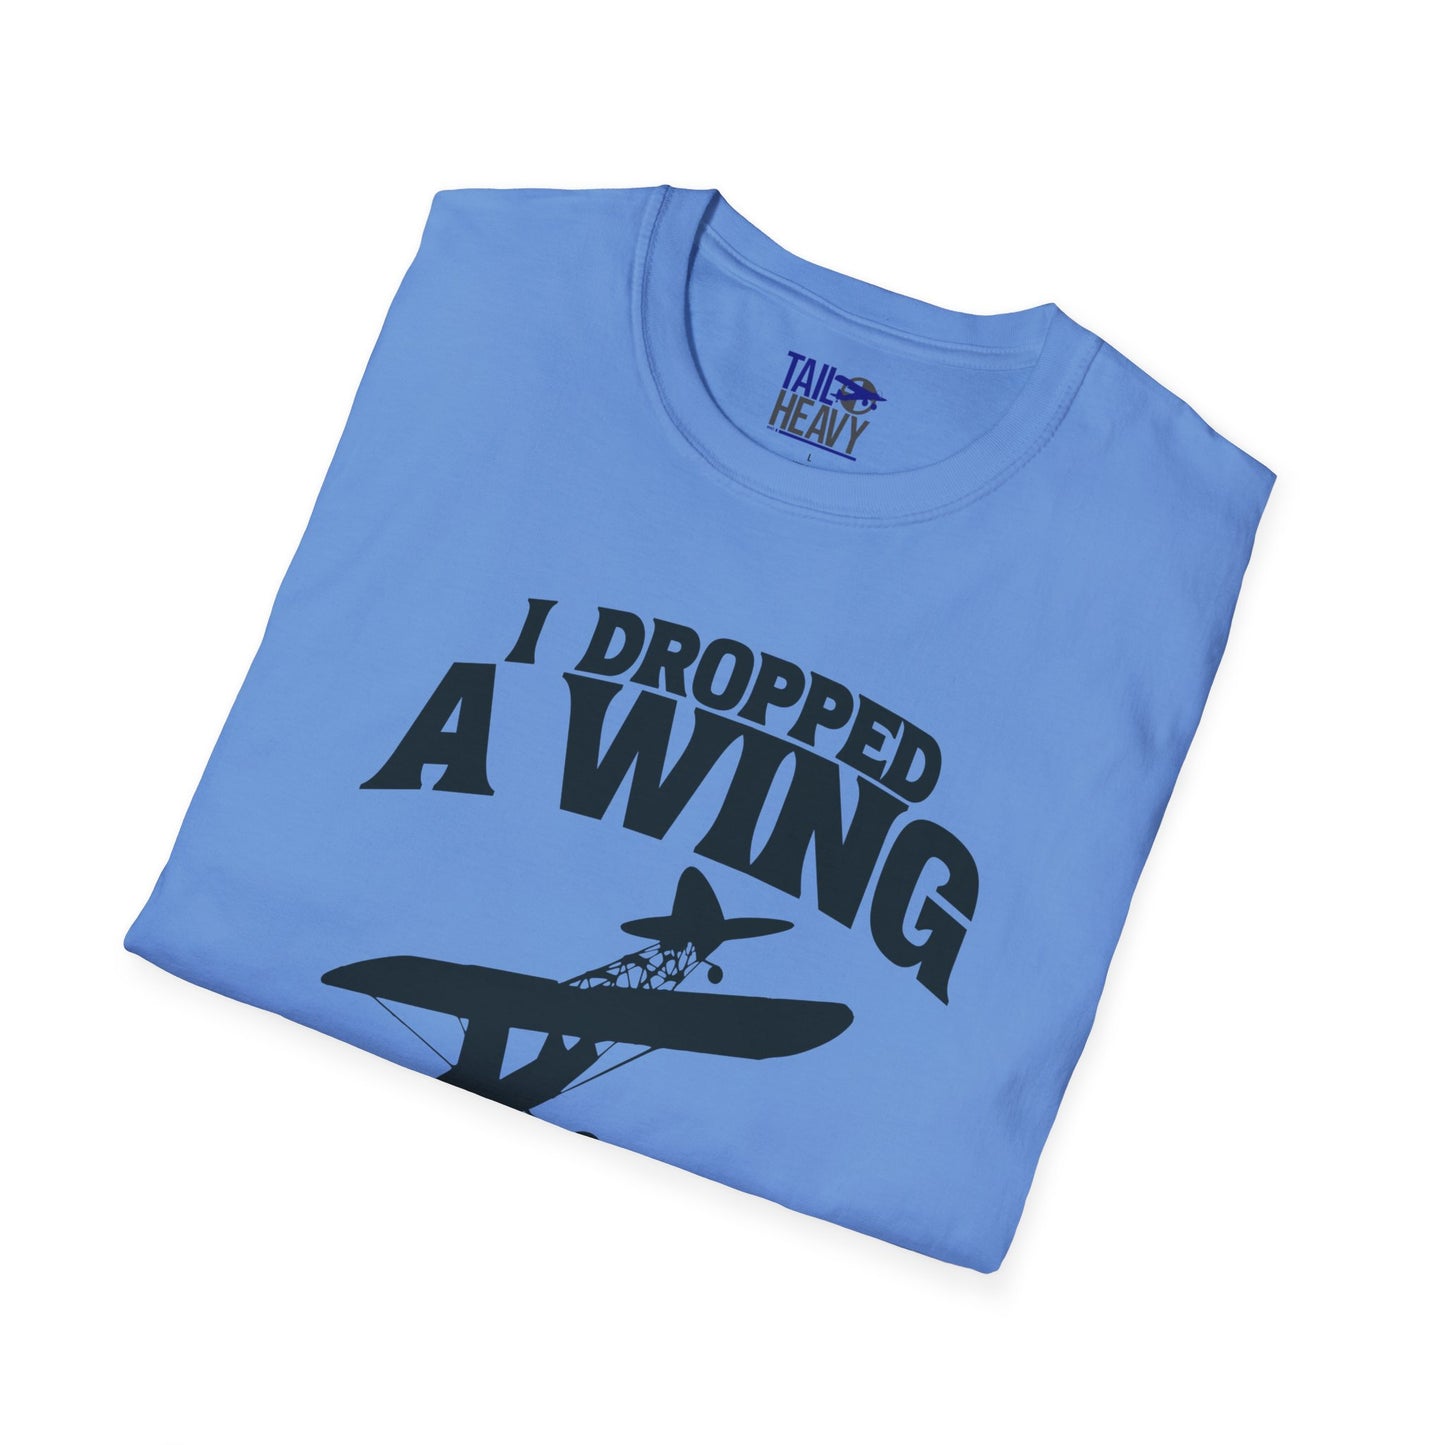 Softstyle "I Dropped a Wing" T-Shirt